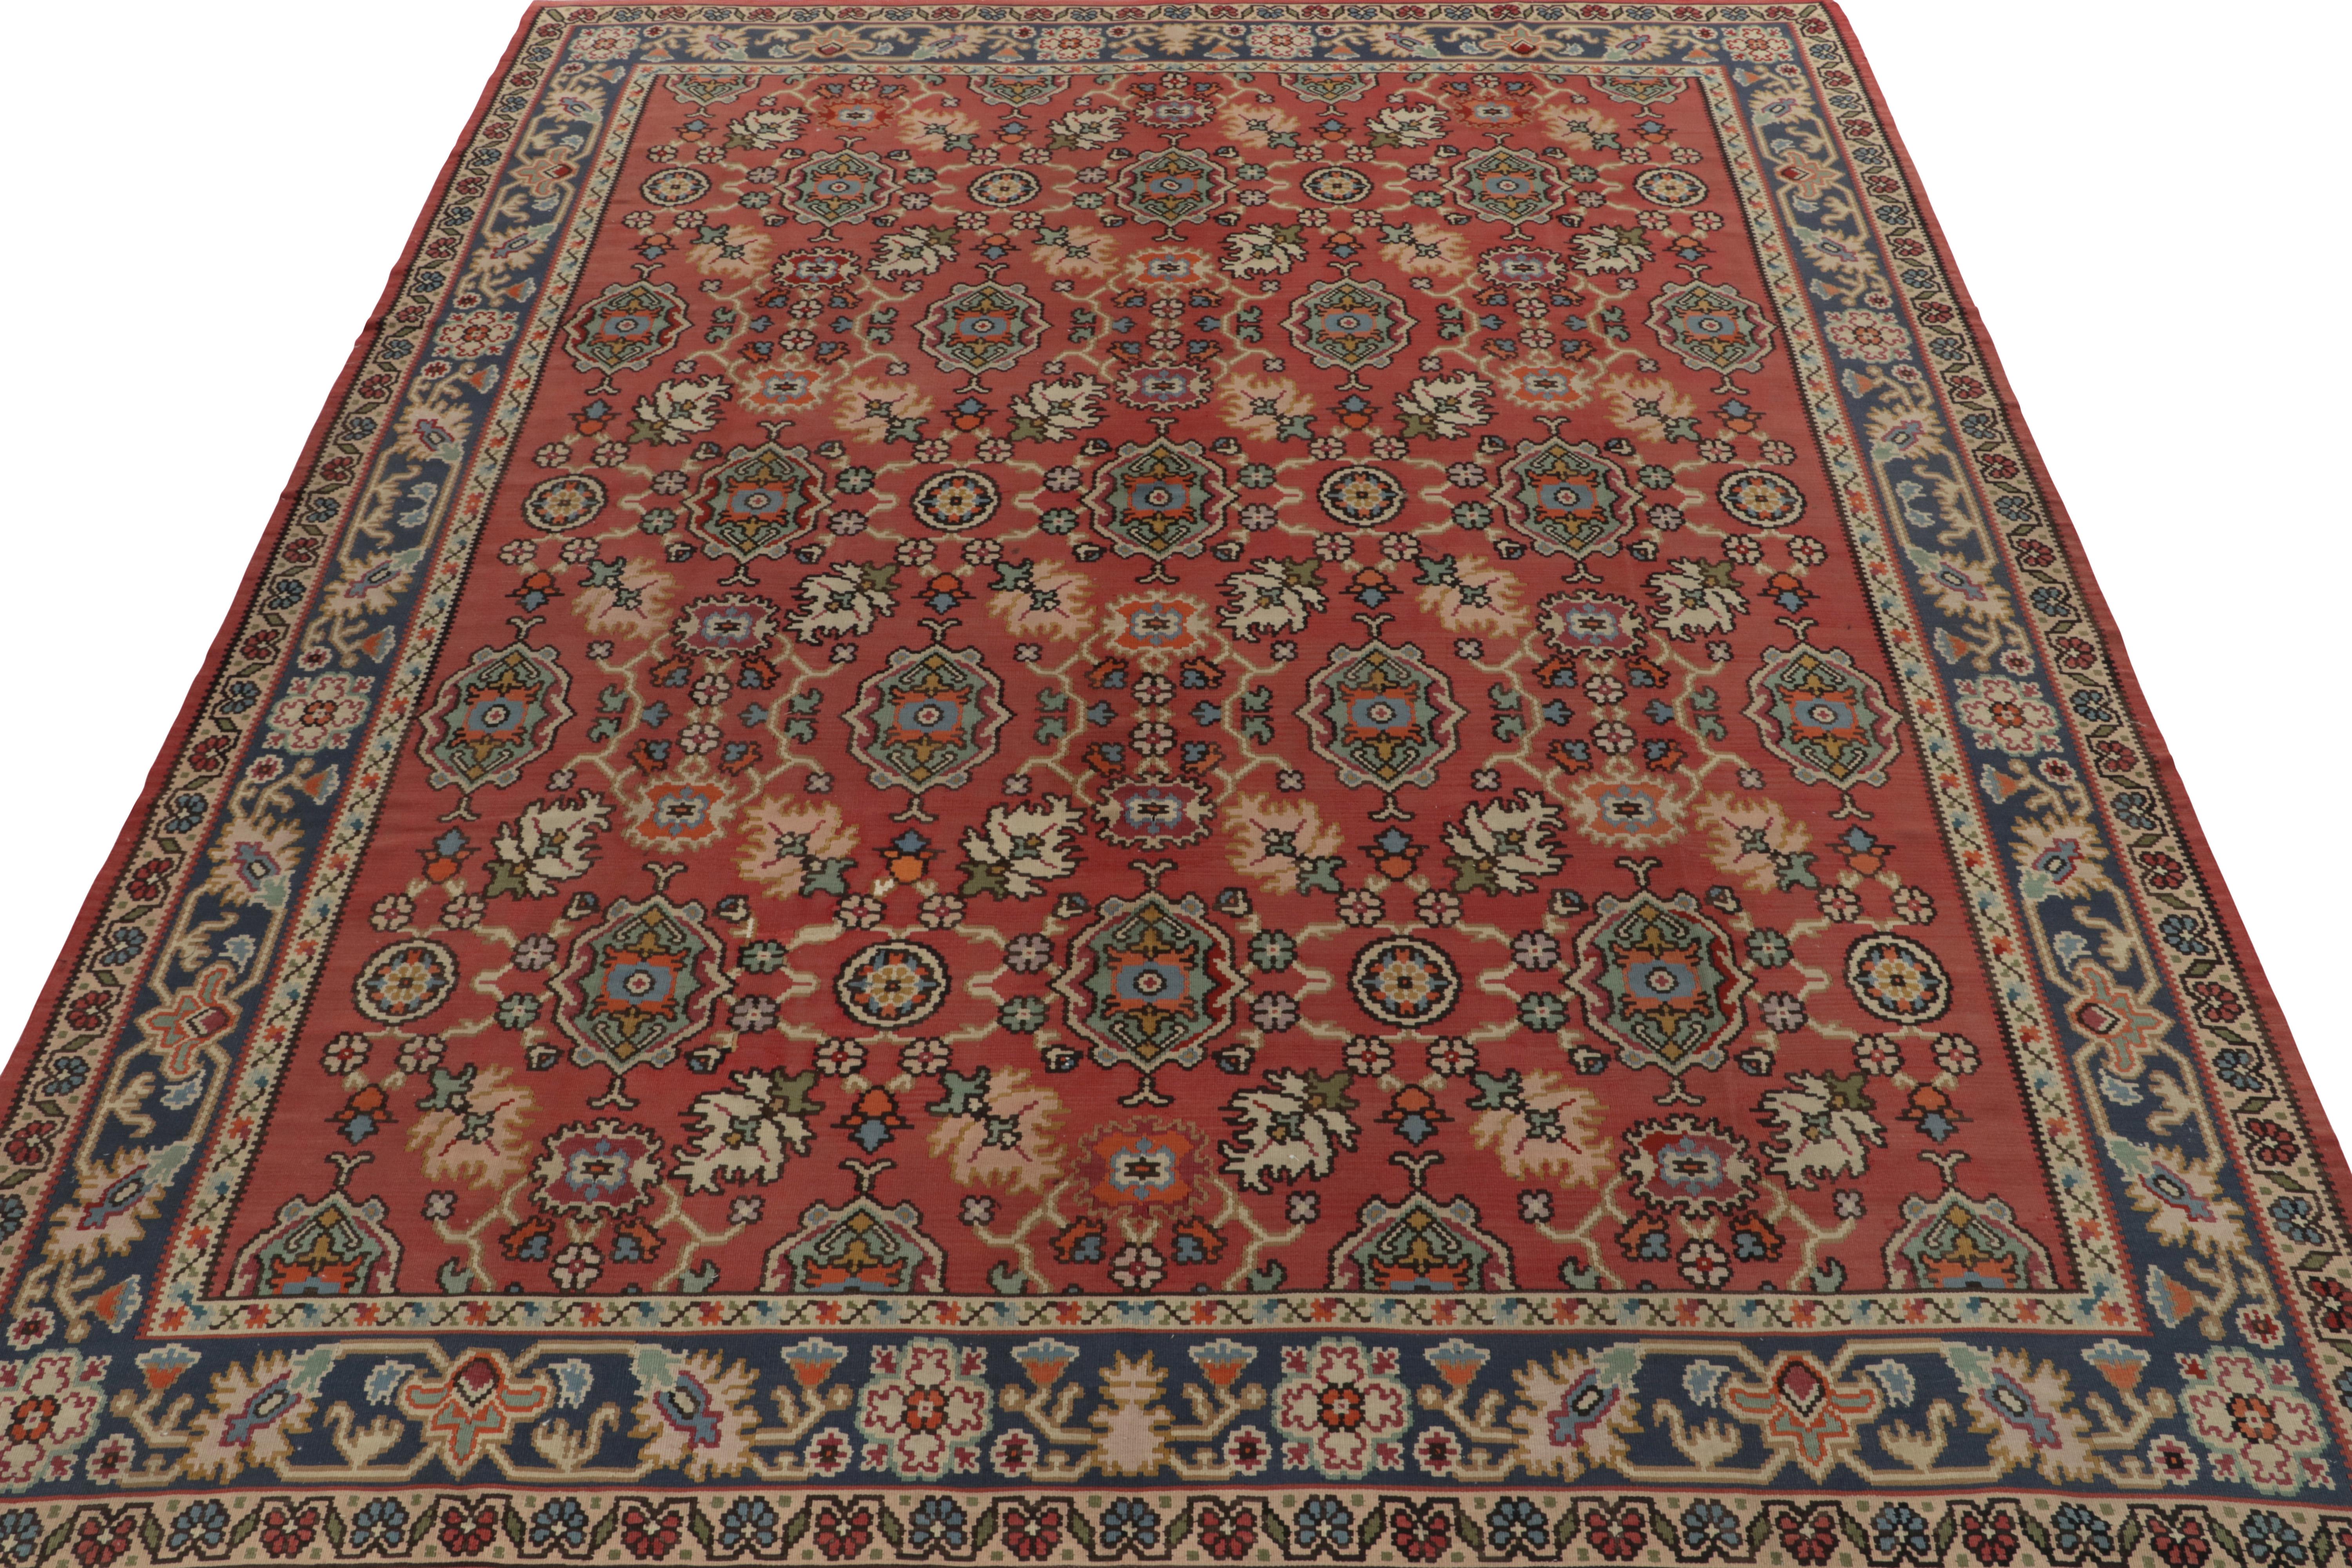 Art Deco Vintage Bessarabian Kilim in Red with Teal Floral Patterns by Rug & Kilim For Sale